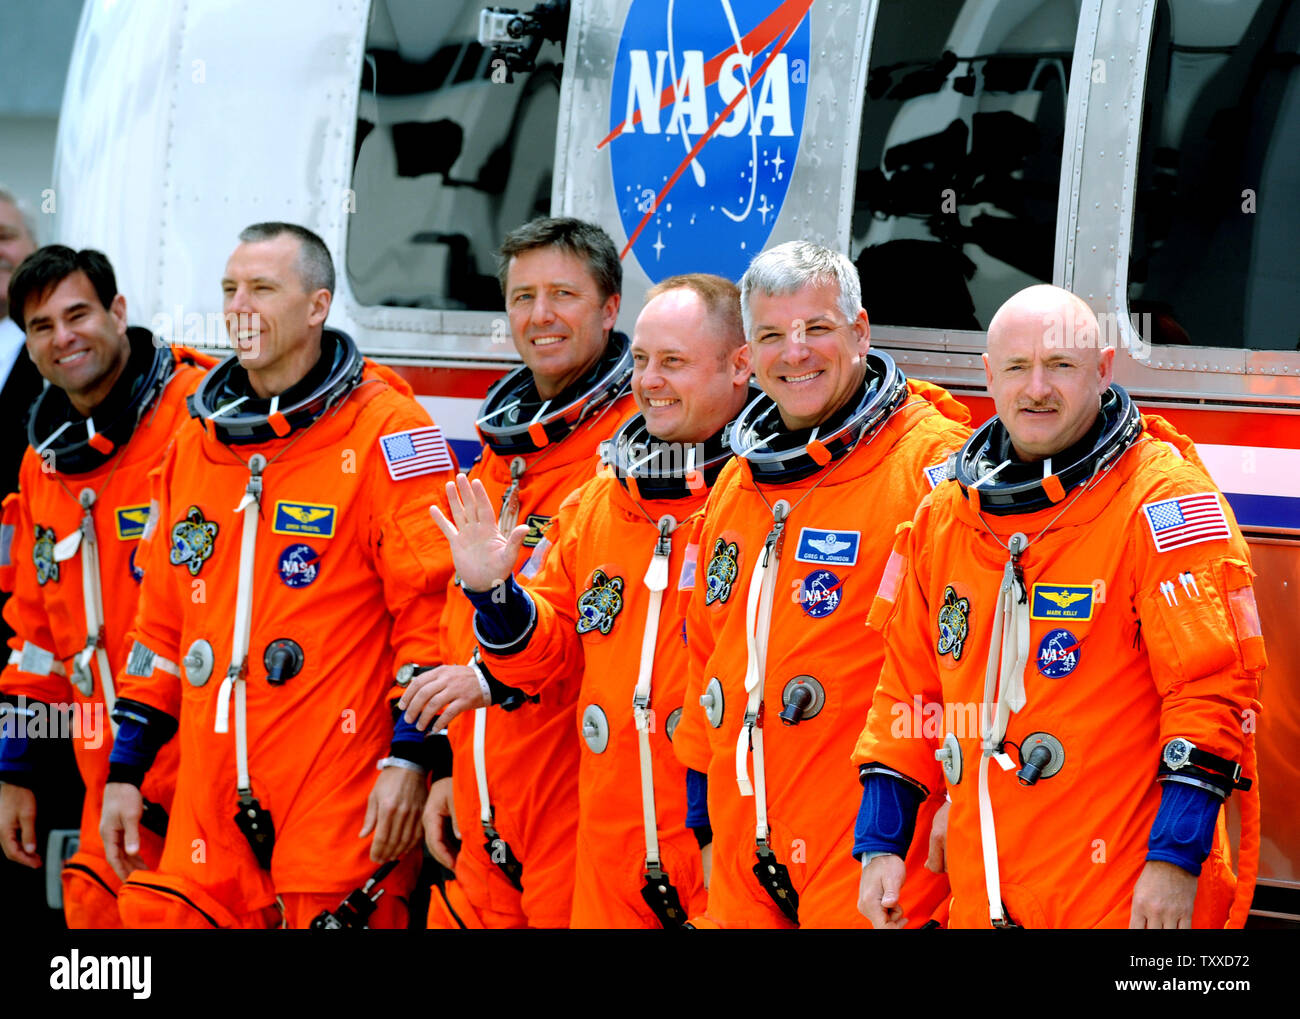 Space Shuttle Endeavour Commander Mark Kelly (right) departs with his crew and boarding the Astrovan on their way to the launchpad for Endeavour's last flight at Kennedy Space Center on April 29, 2011.  The launch attempt was scrubbed minutes later. Behind Kelly is Pilot Greg Johnston and mission specialists  Mike Finke and Roberto Vittori, Drew Feustel, and Greg Chamitoff (left).  Kelly is the husband of Arizona Congresswoman Gabrielle Giffords, who was recovering from an assassination attempt and at the Cape to watch the possible liftoff.   UPI/ Pat Benic Stock Photo